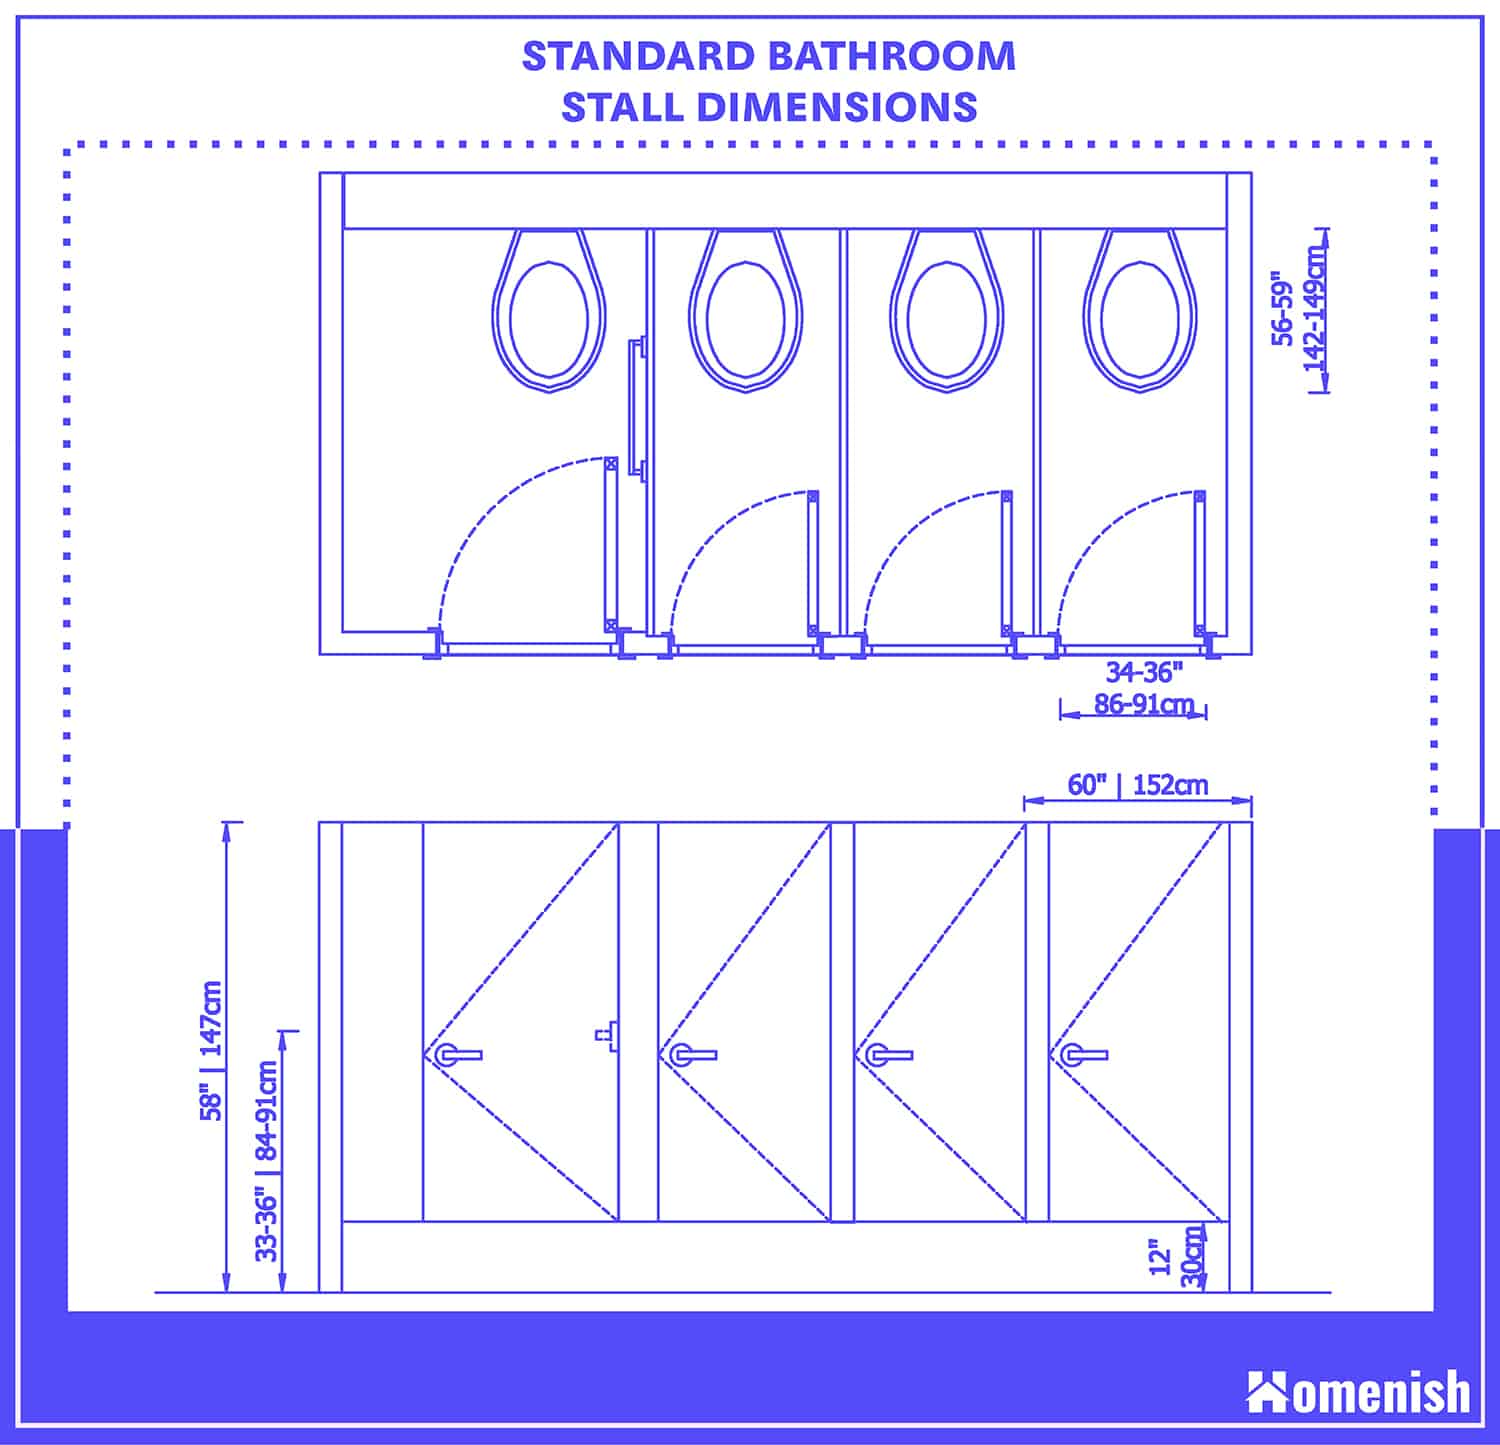 What Are the Bathroom Stall Dimensions? Homenish